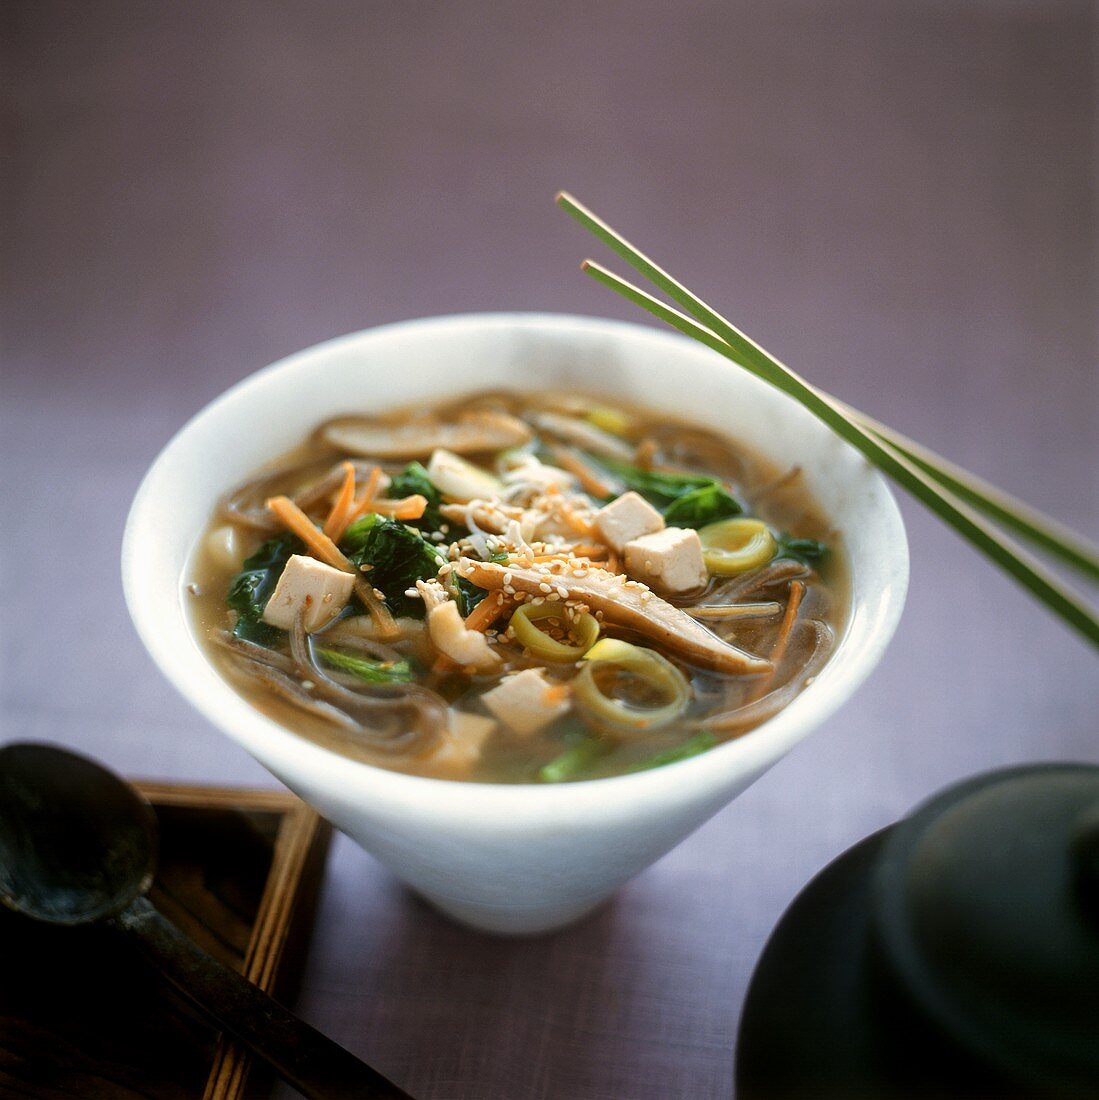 Sweet and sour soup with tofu, vegetables and sesame